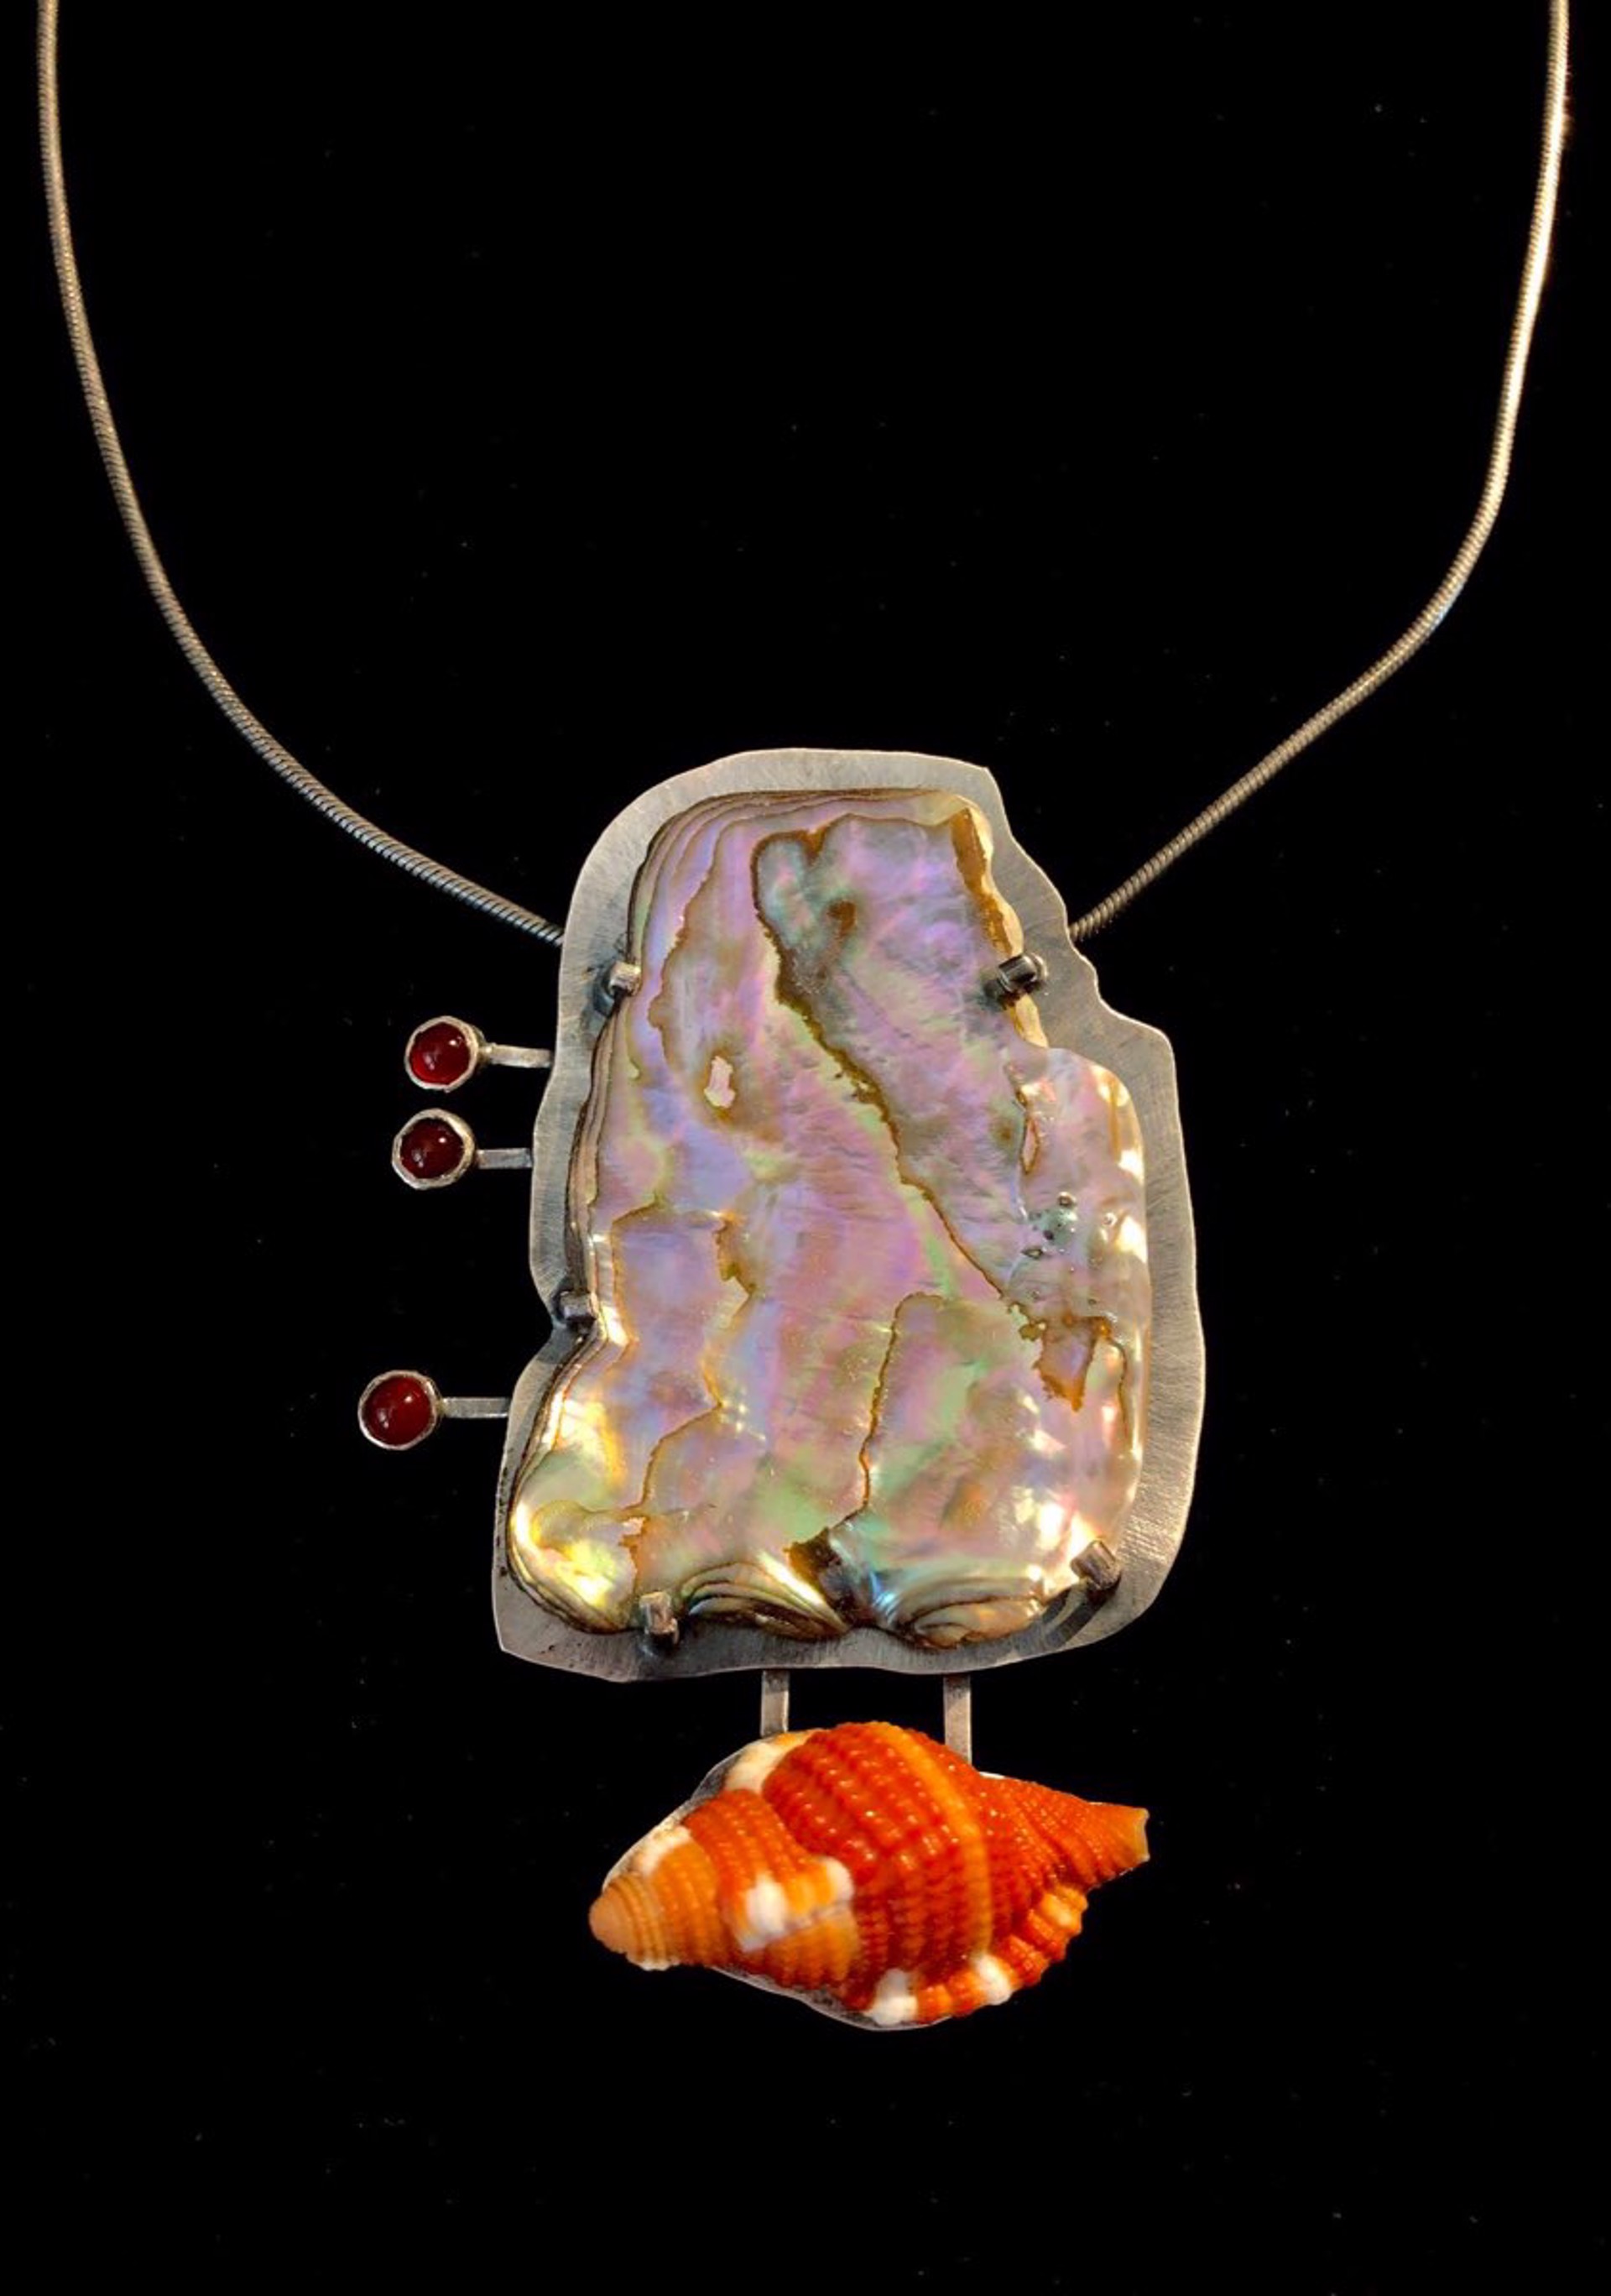 Abelony, Carnelian, Shell, and Sterling Silver Necklace by Anne Rob